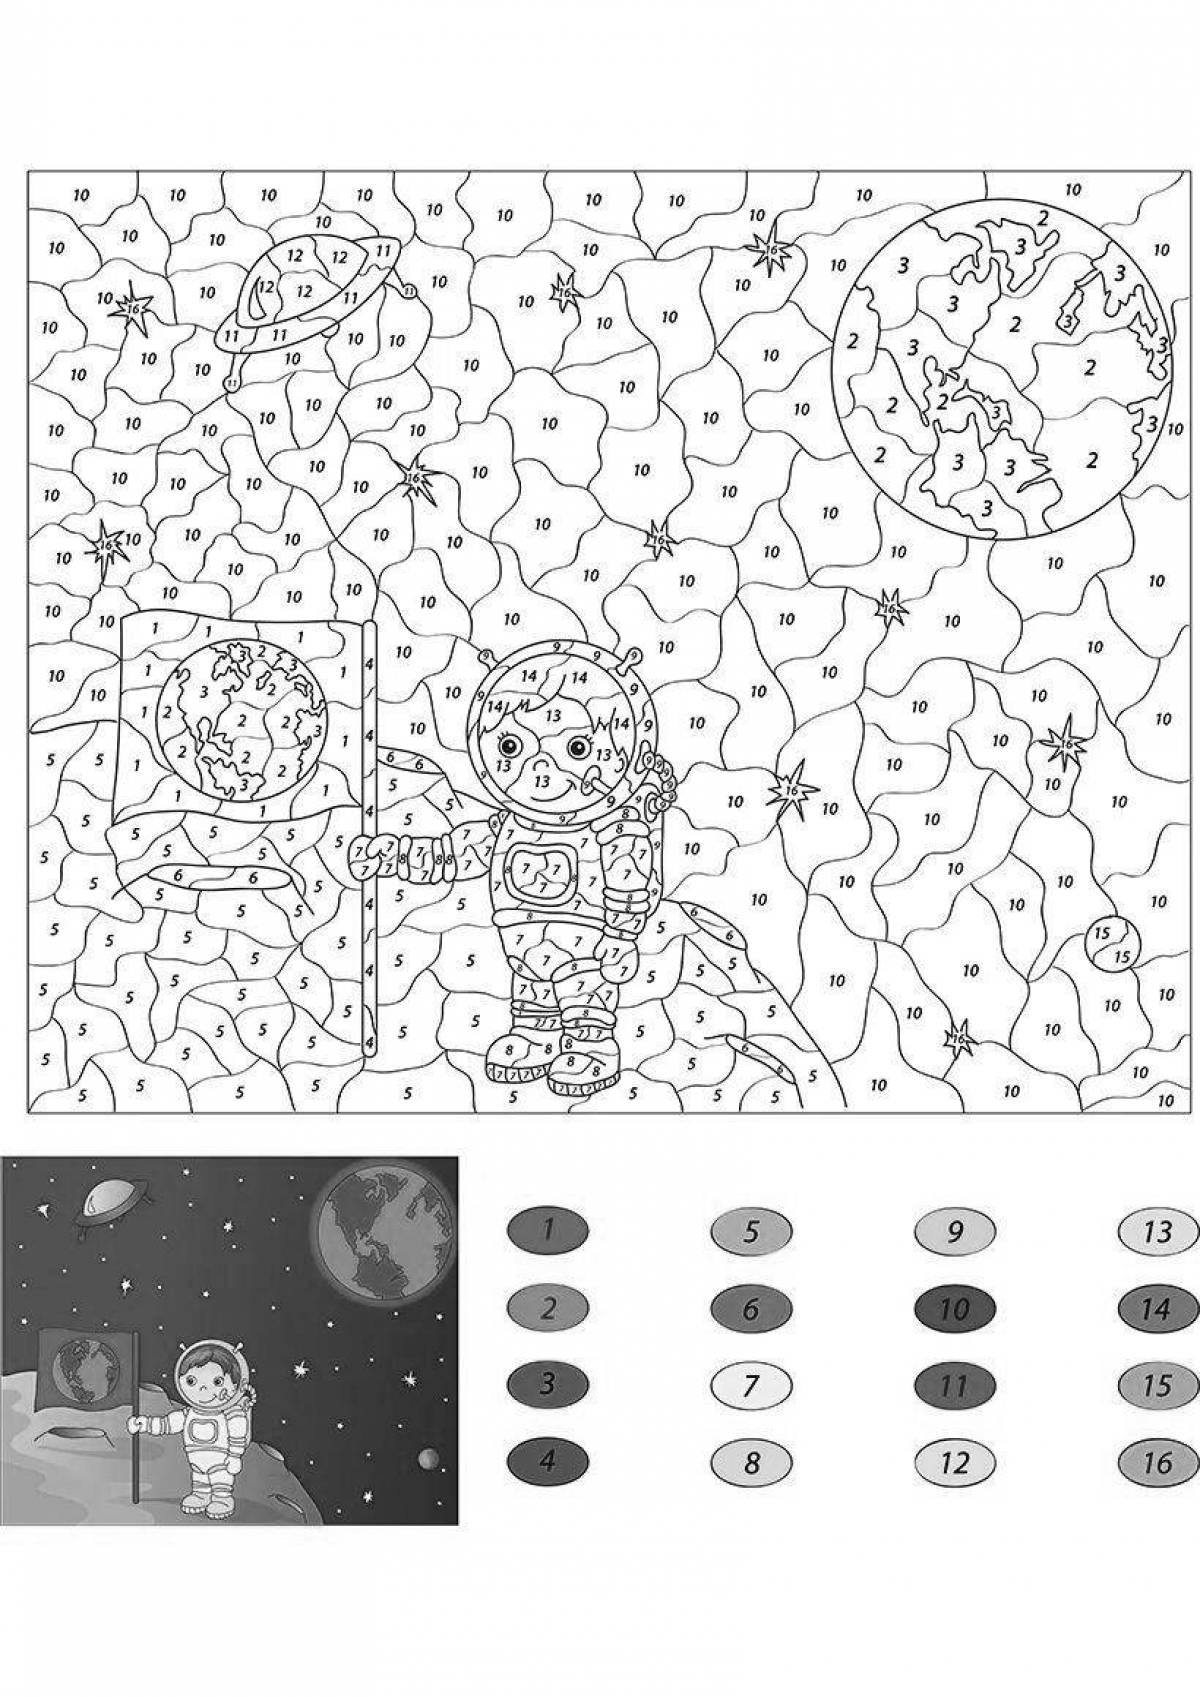 Calm space by numbers coloring page